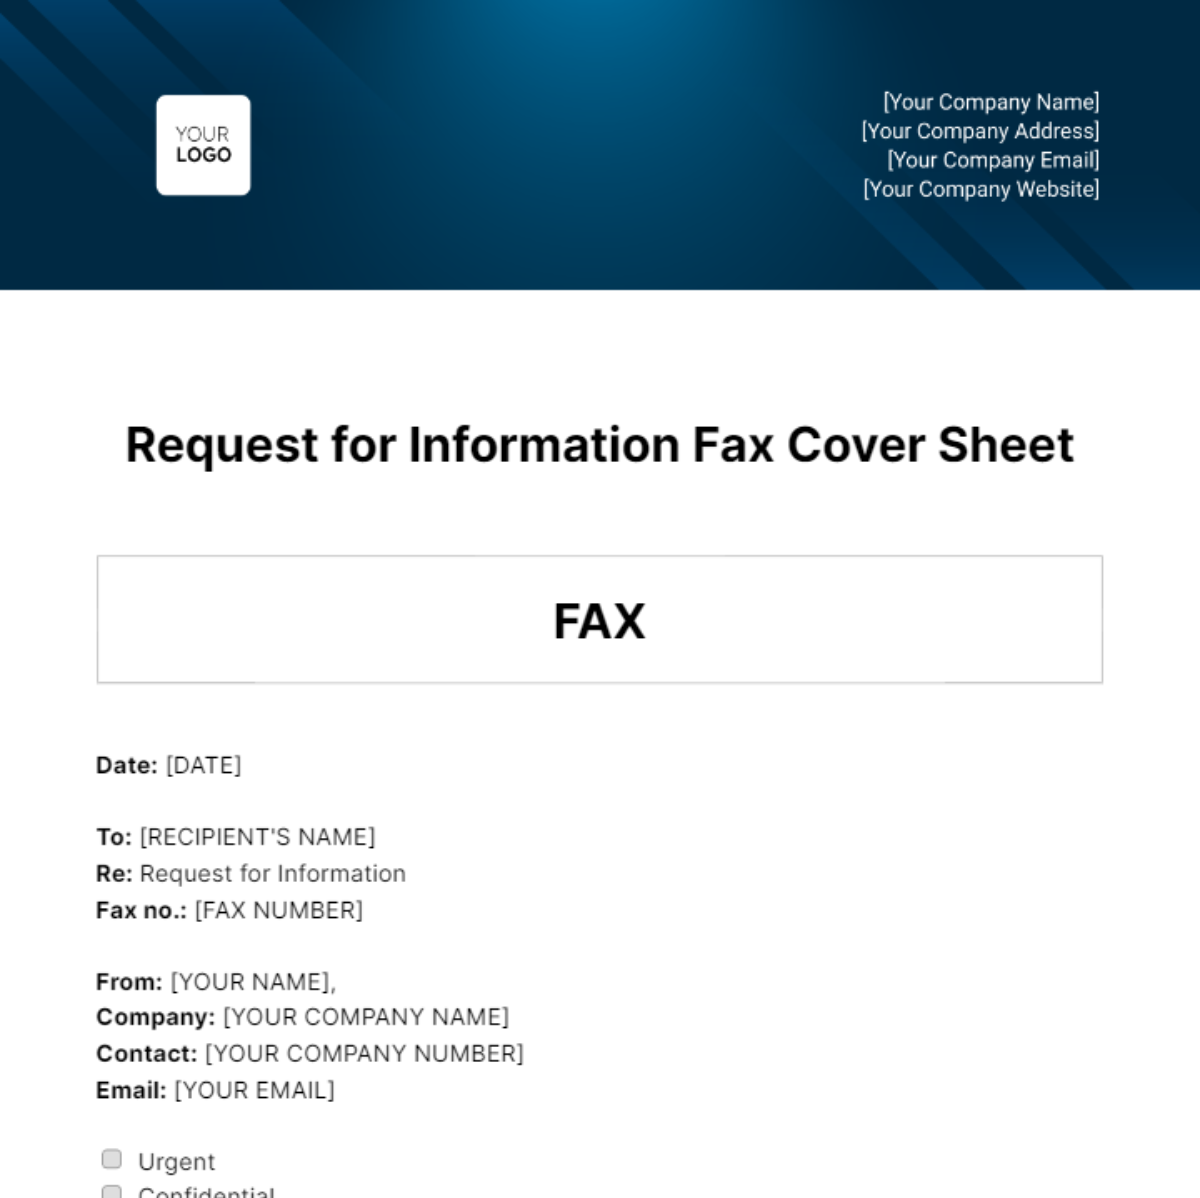 Free Request for Information Fax Cover Sheet Template